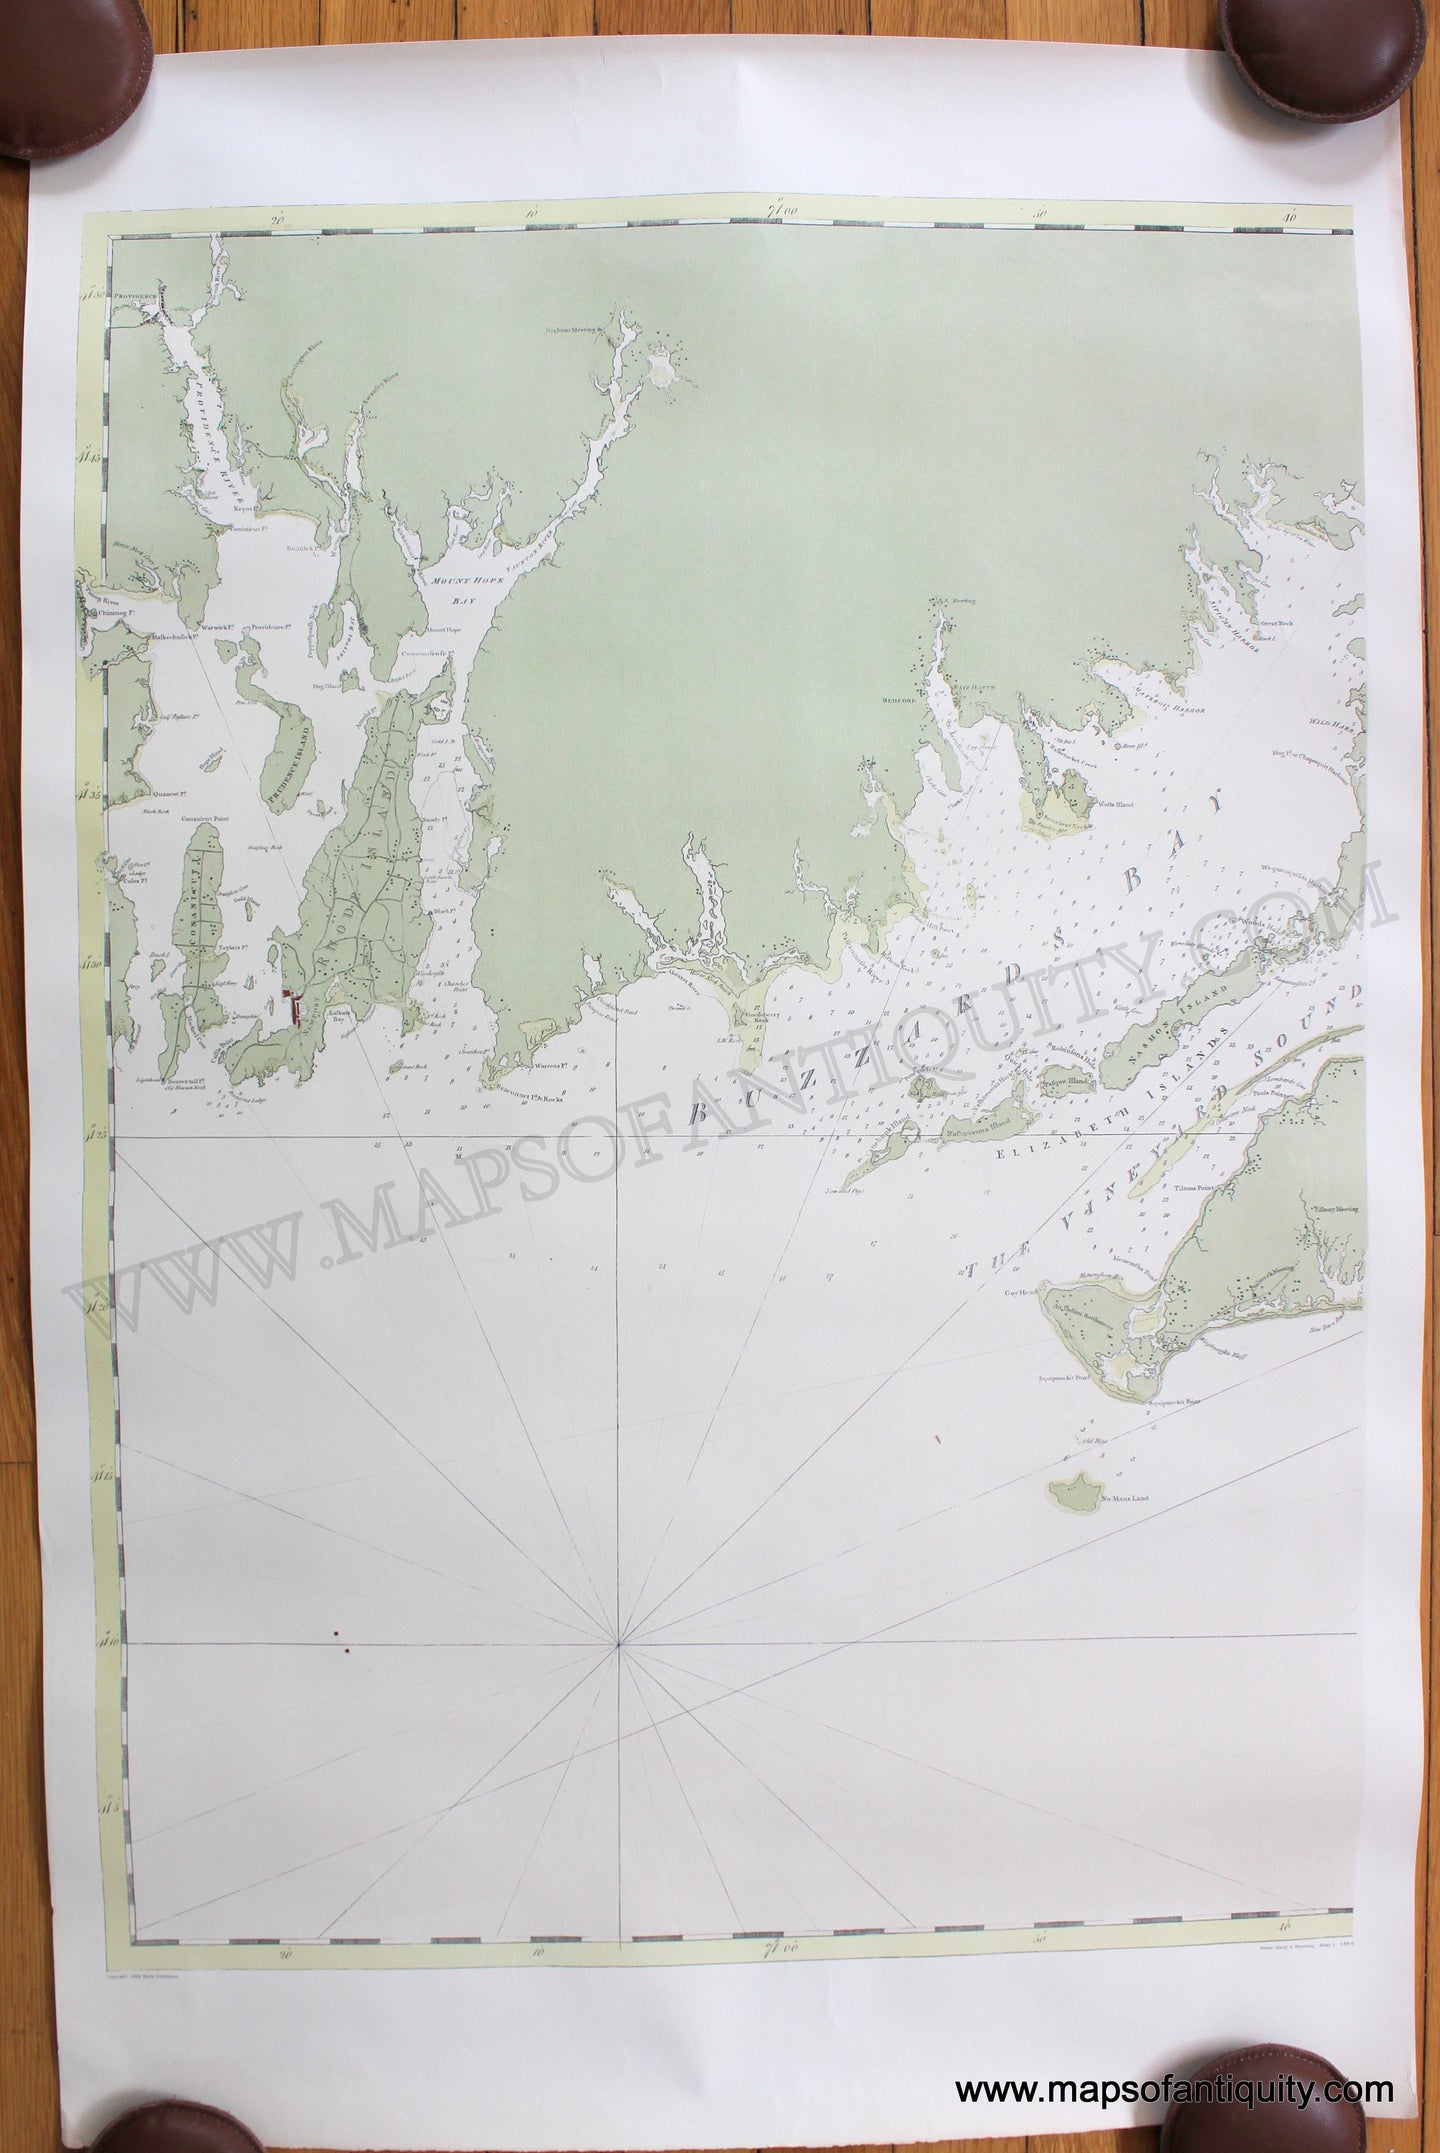 20th-Century-Printed-Color-Reproduction-1966-Reproduction-of-Des-Barres'-Chart-of-Providence-to-Onset-and-Newport-to-Woods-Hole-Barre-Publishers-1960s-20th-century-Maps-of-Antiquity